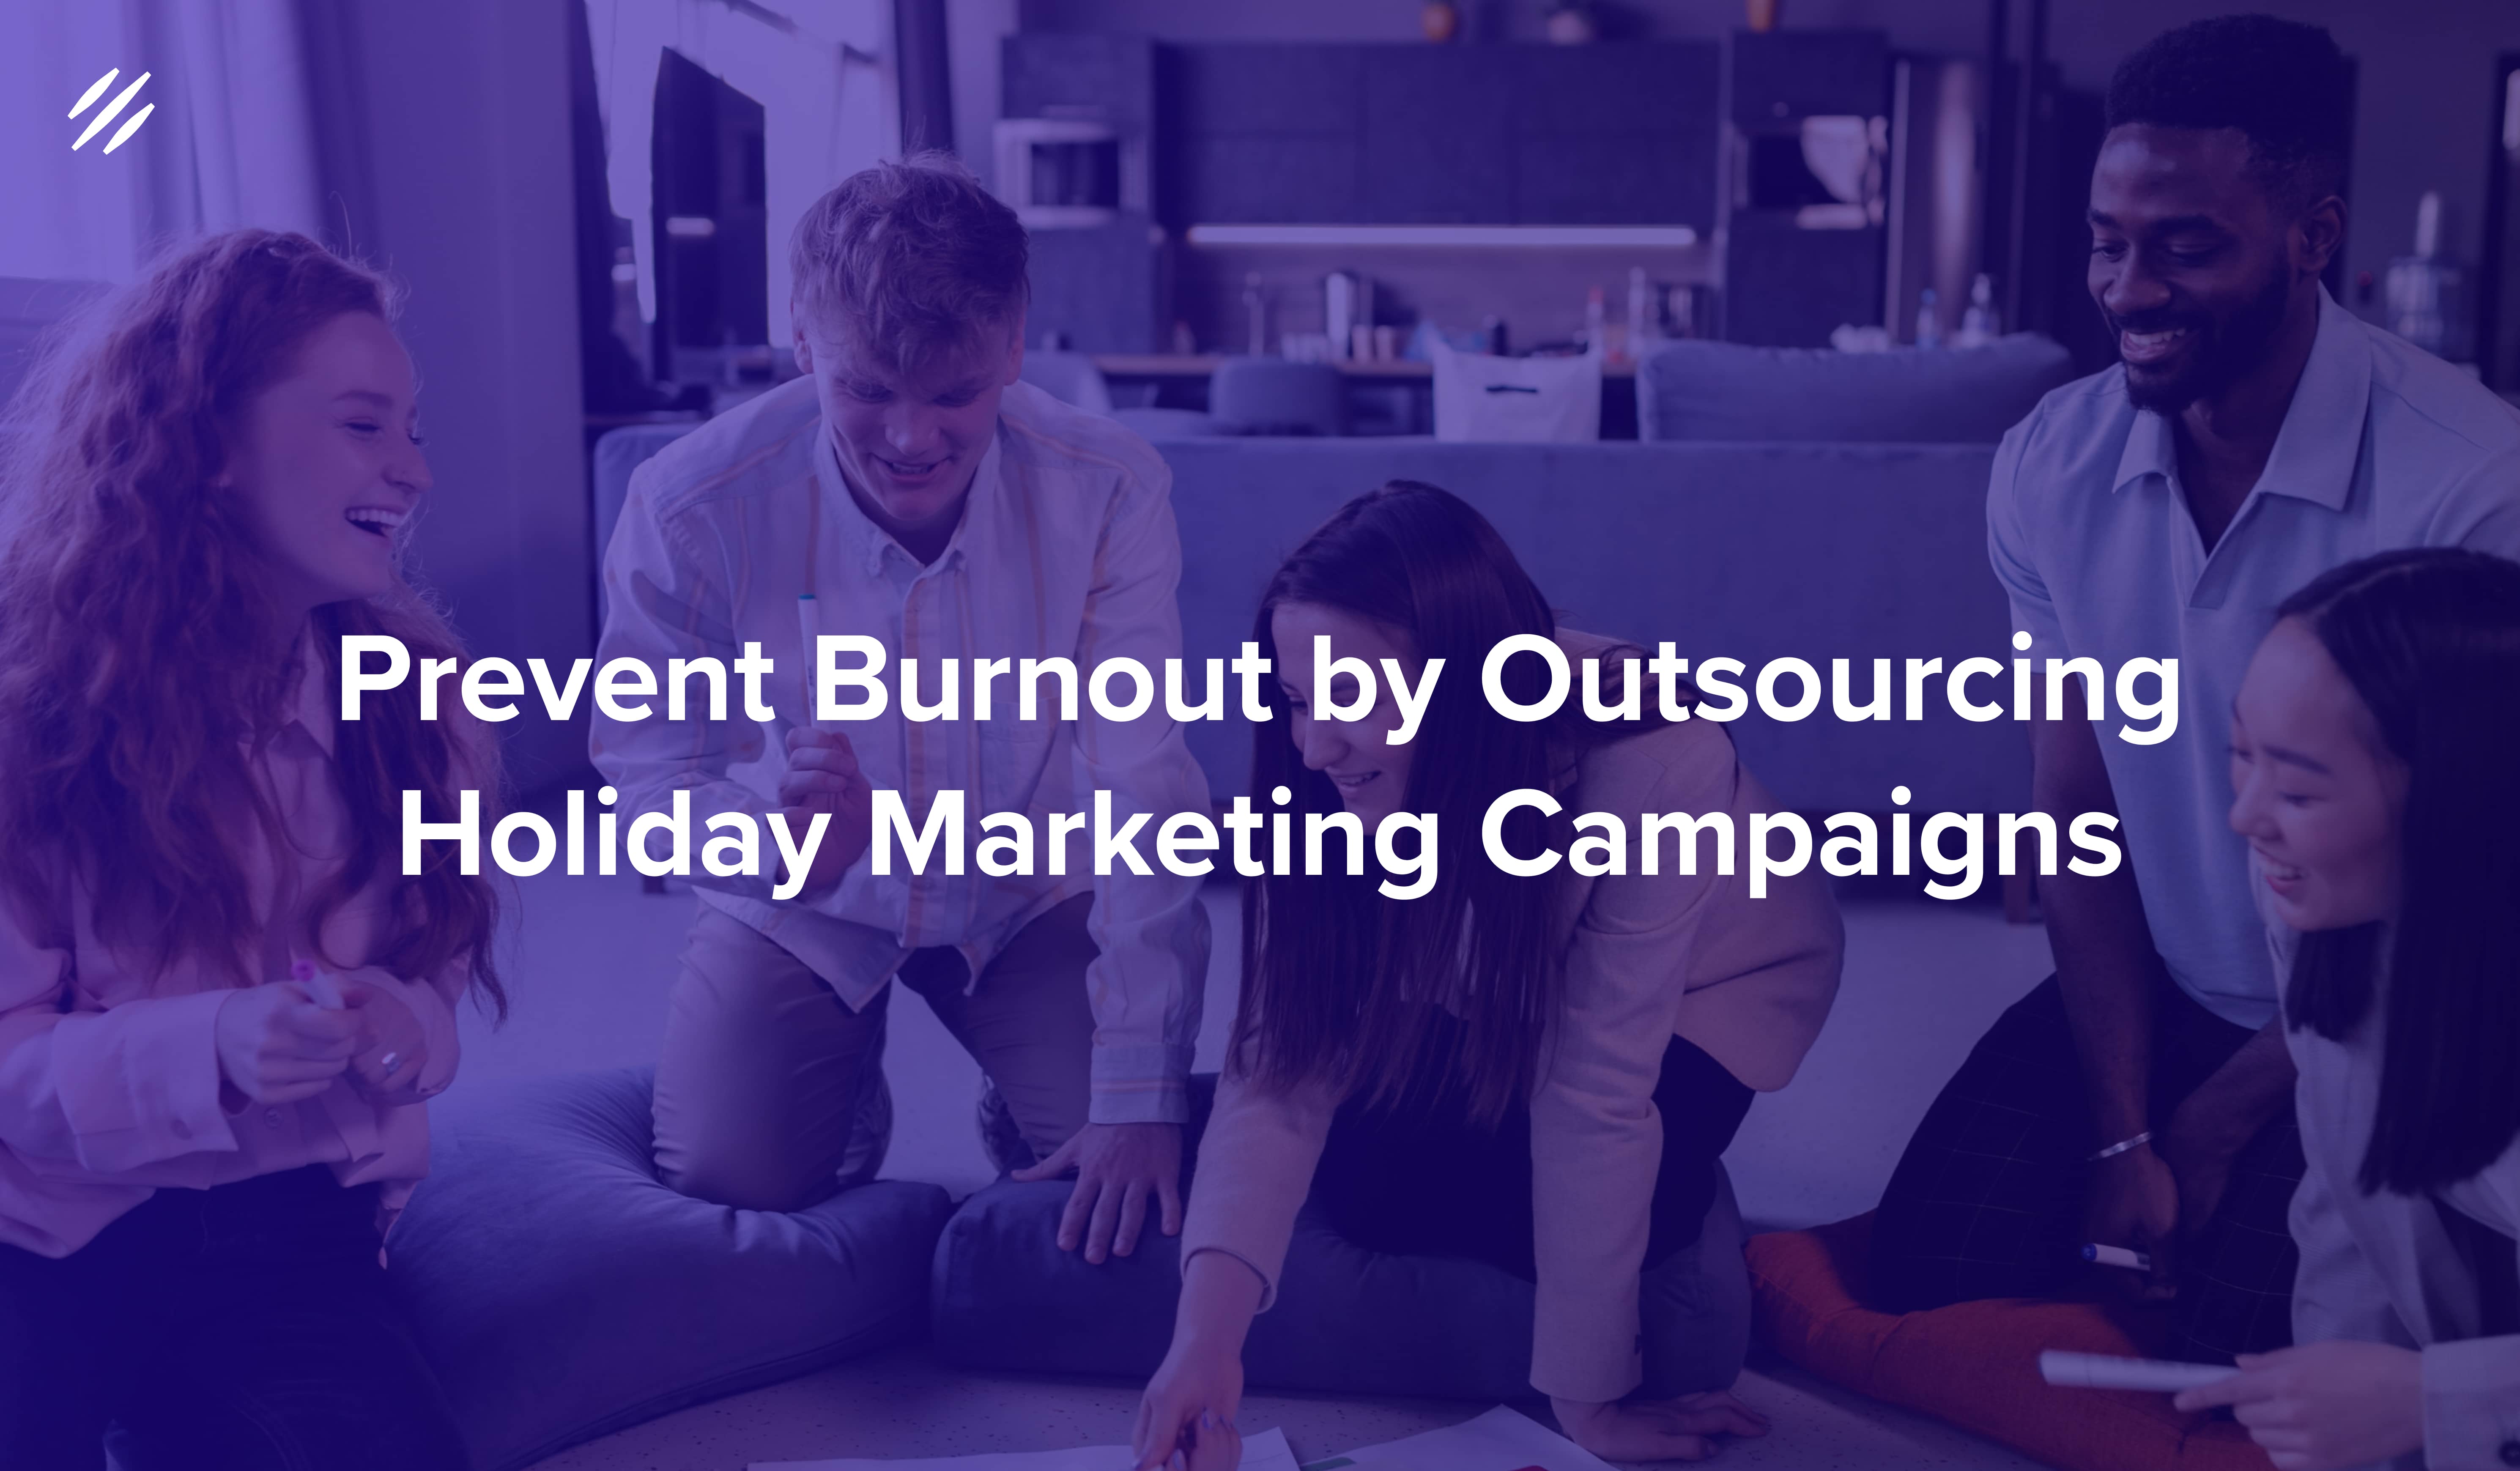 Prevent Burnout by Outsourcing Holiday Marketing Campaigns